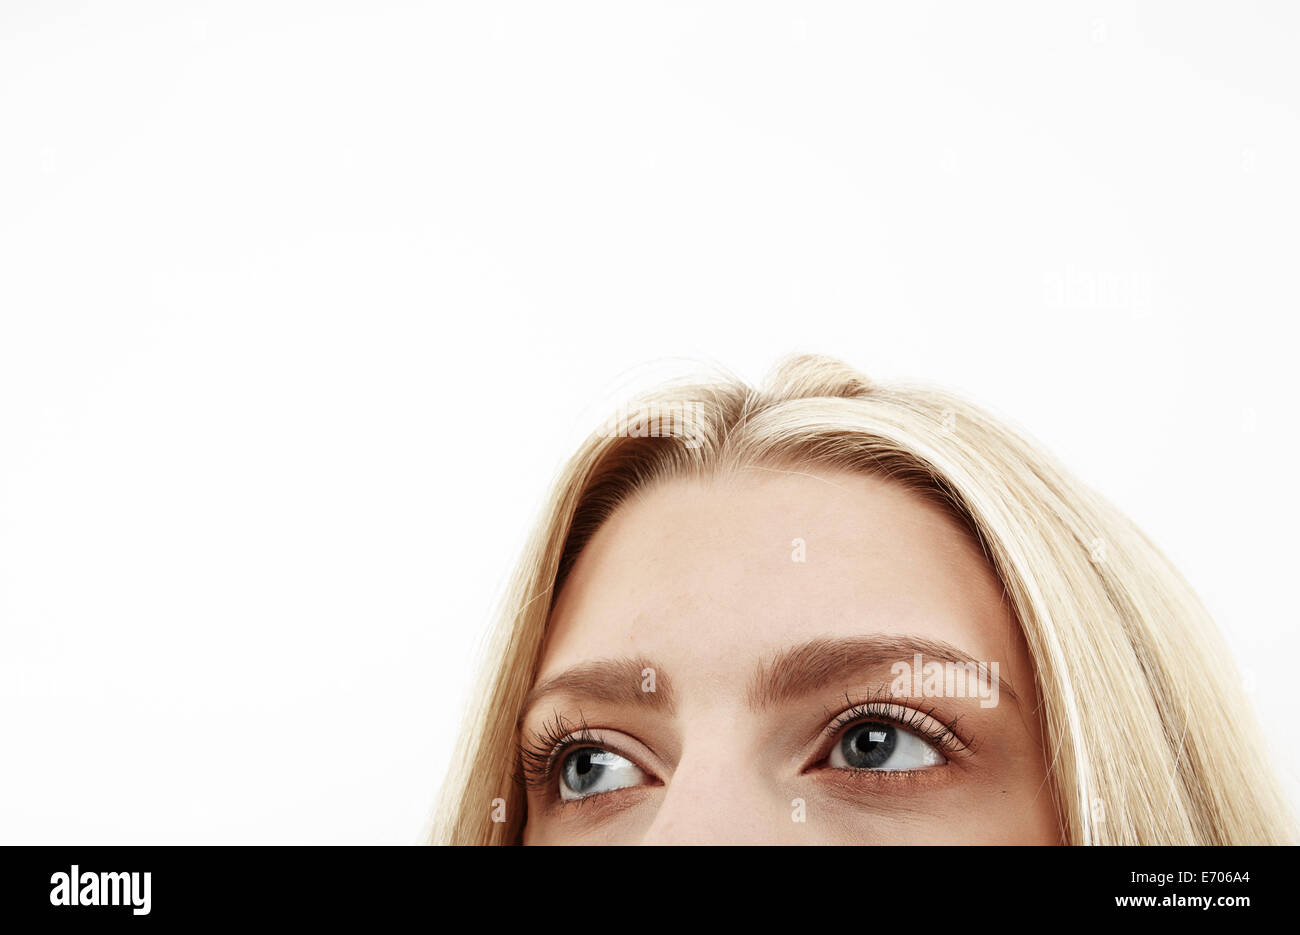 Cropped close up studio portrait of young woman's eyes Stock Photo